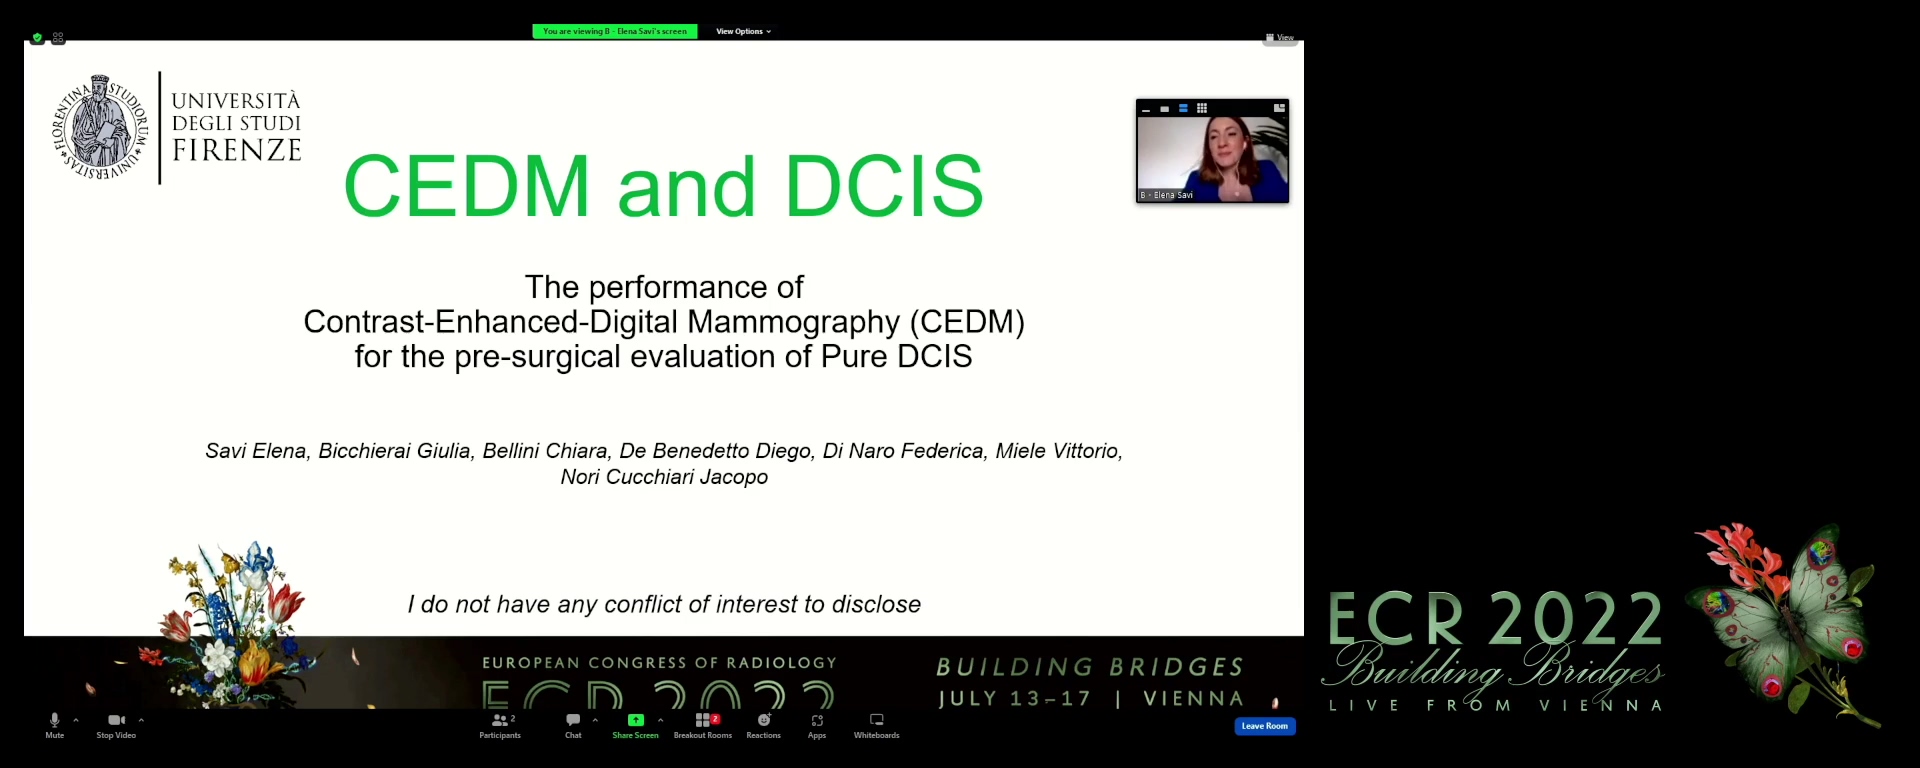 The CEDM performance in the presurgical evaluation of DCIS